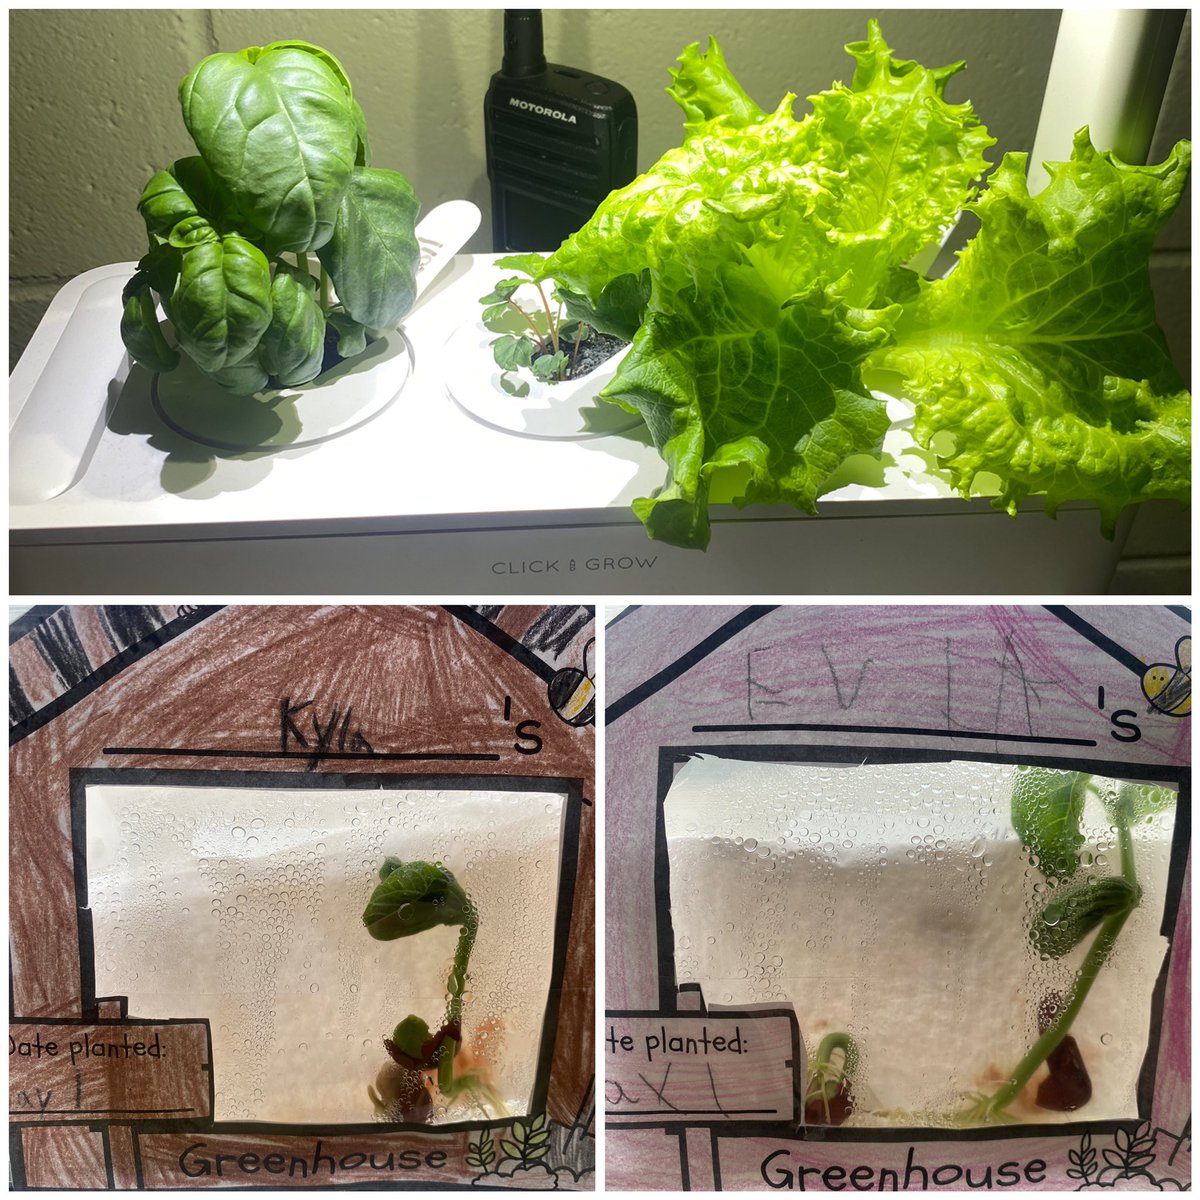 We are seeing huge growth in our classroom! Not just in students learning, but our plants too. The beans have really sprouted in their greenhouses and the students are loving journaling their progress. @ocsbEco #ocsbScience @StMaryOCSB